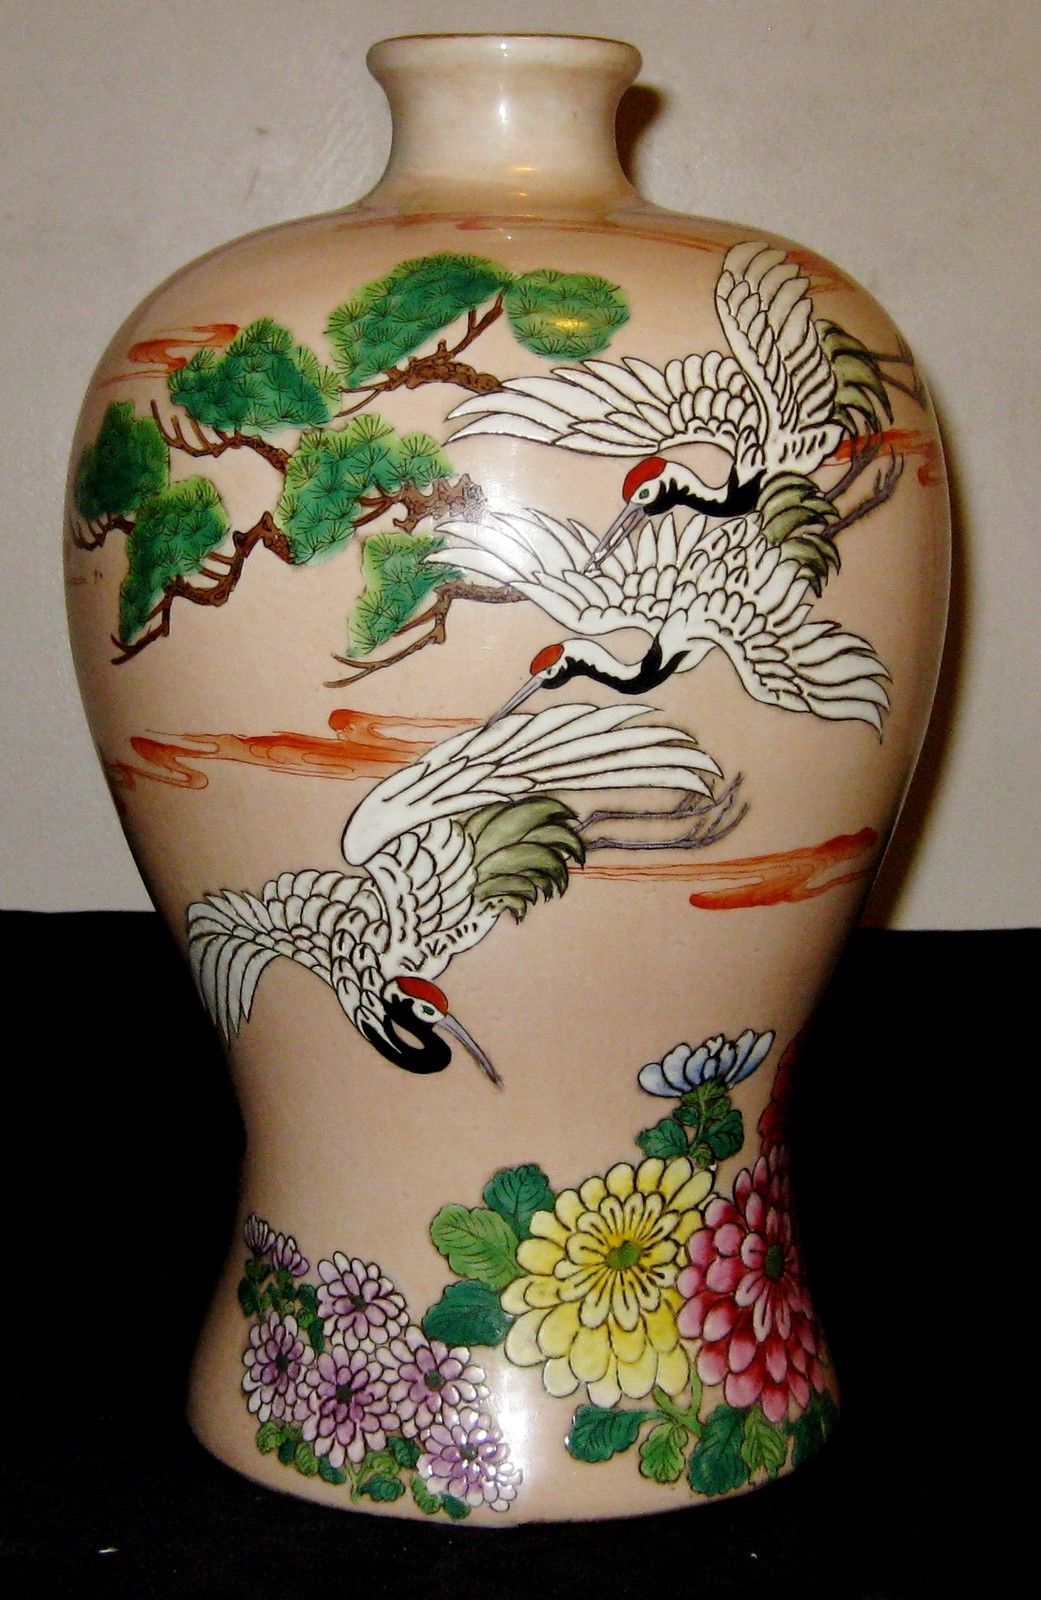 Antique Chinese Hand Painted Famille Rose Porcelain Vase 19th Century, NR.